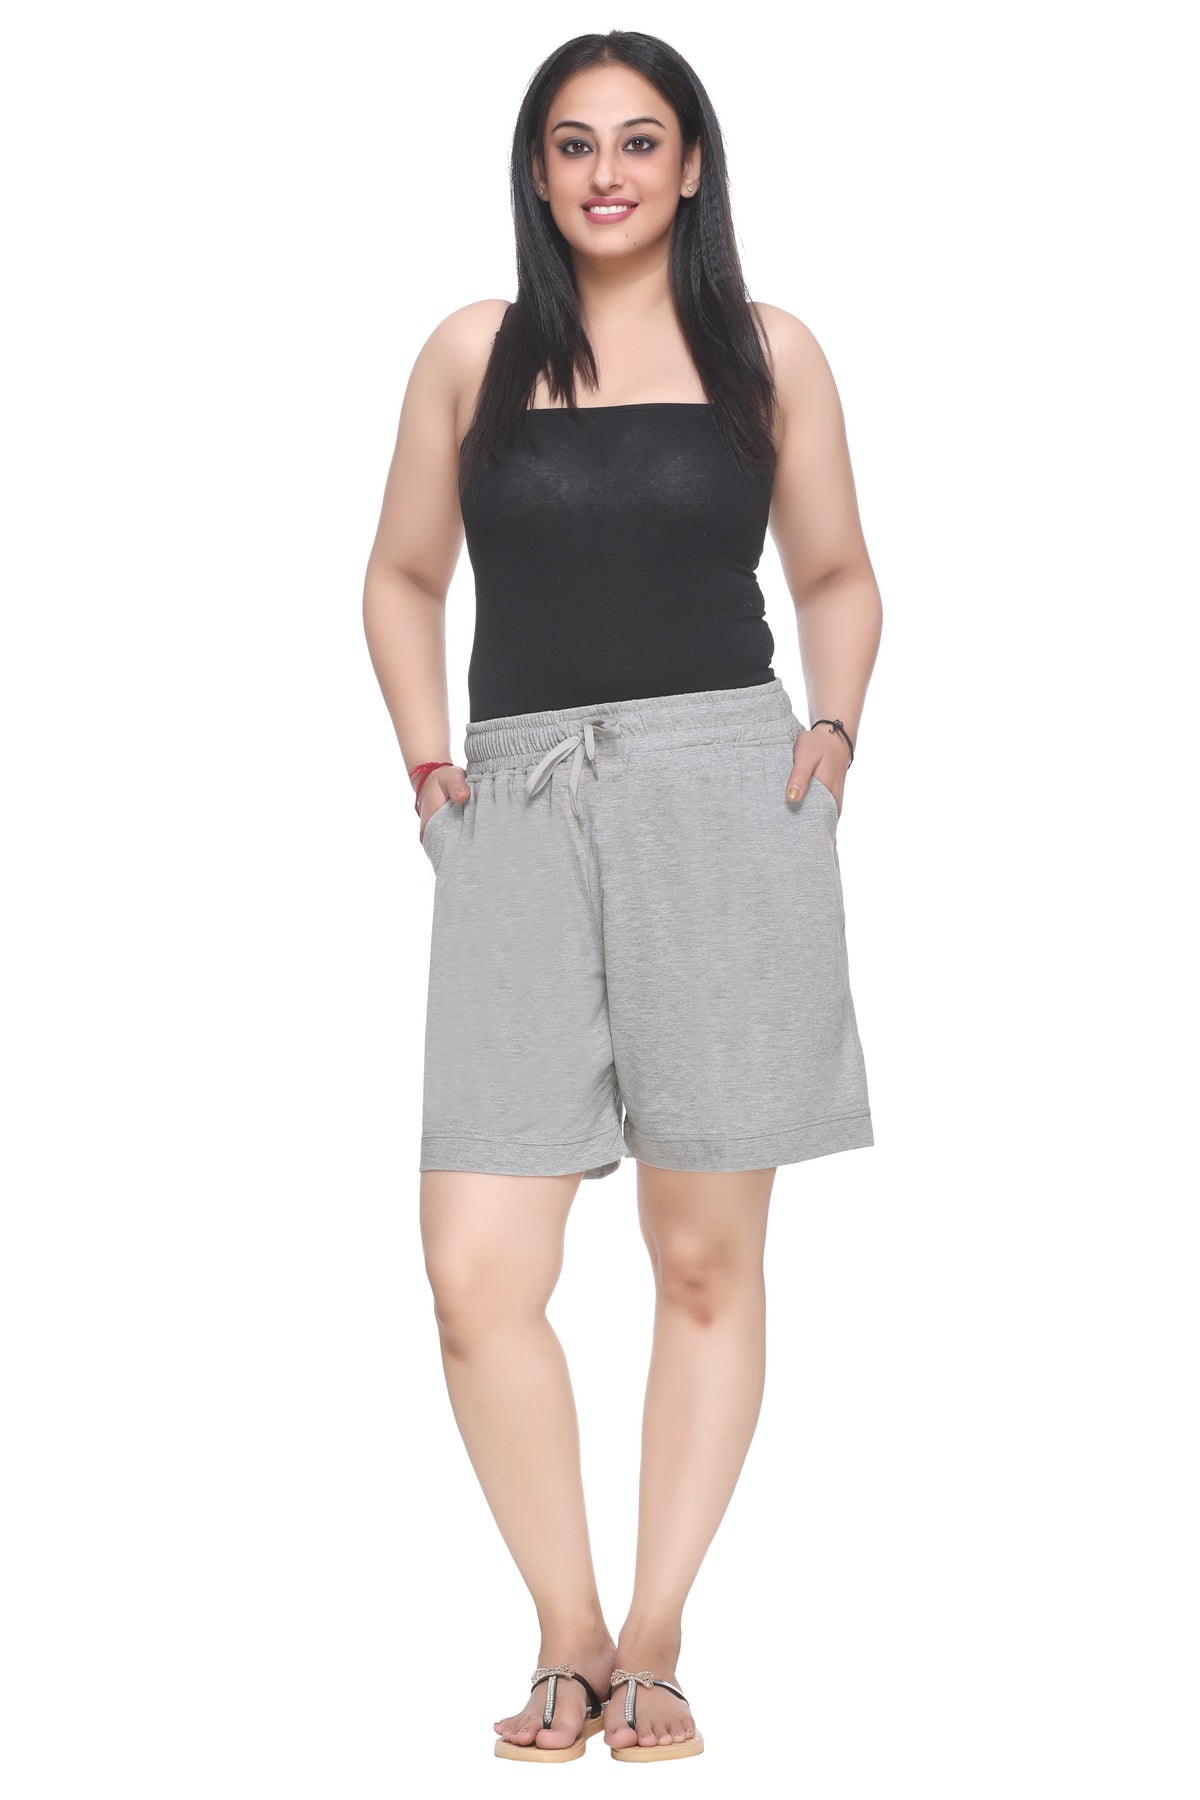 CUPID Plus Size Plain Barmuda/ Lounge Shorts for Women Combo of 2 (Rosy Pink/ Grey) freeshipping - Cupid Clothings